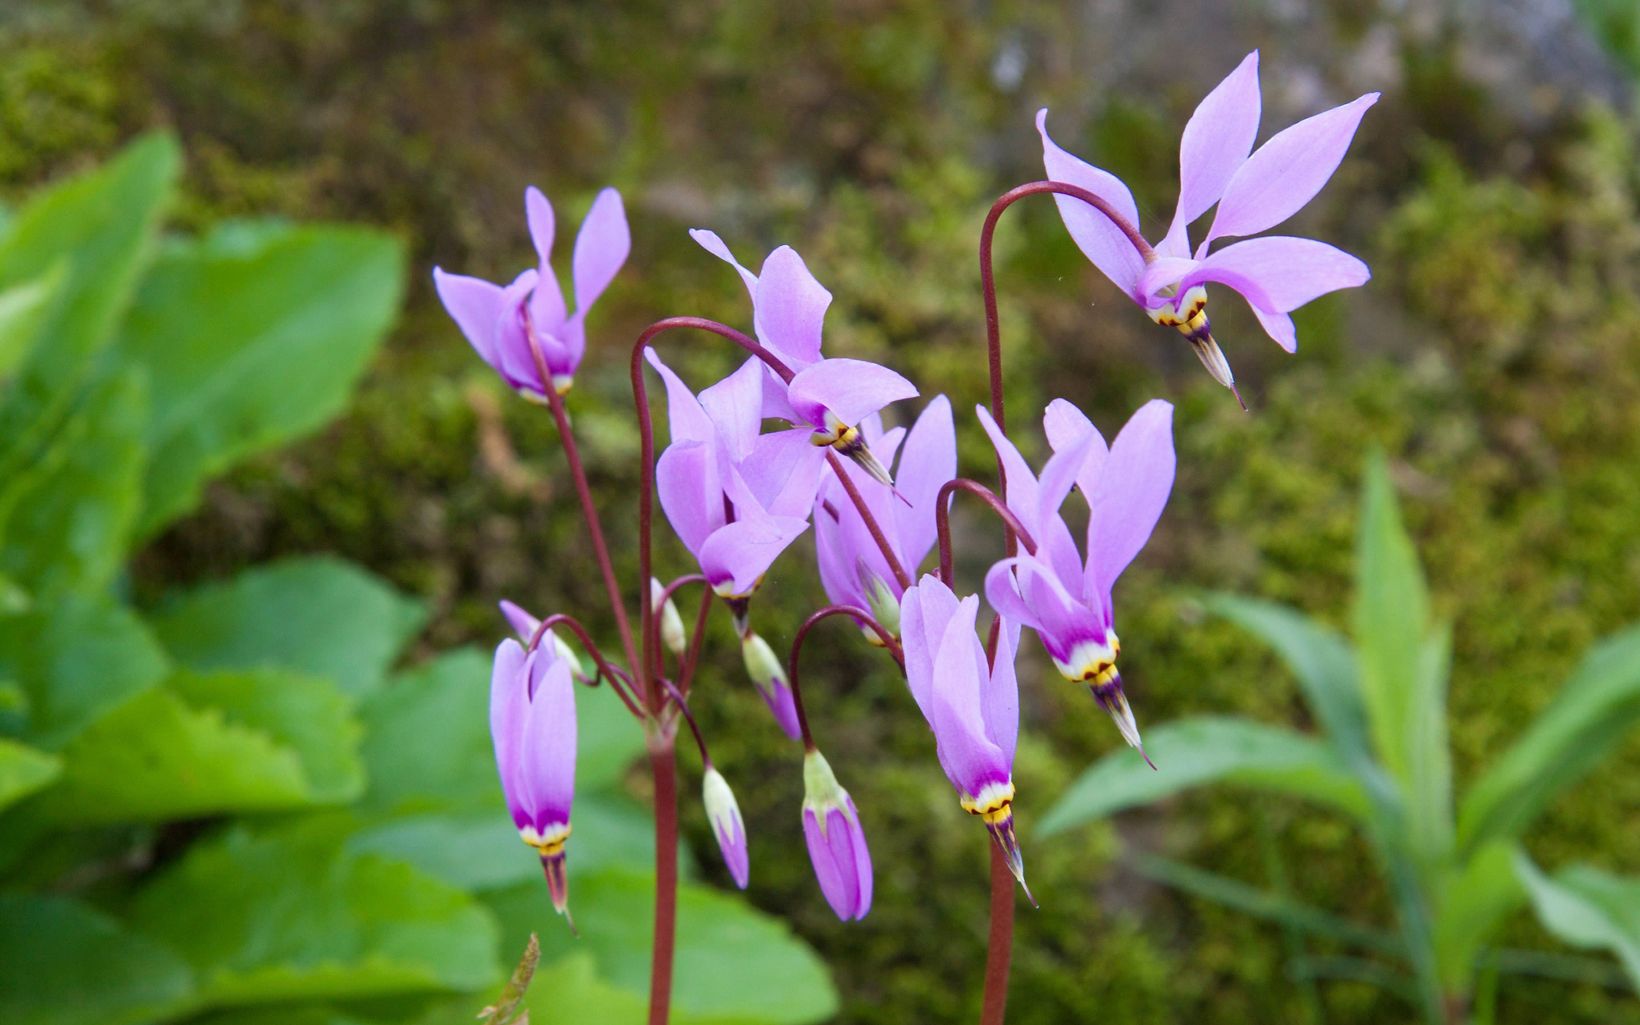 Chiwaukee Prairie is home to more than 400 plant species including shooting stars. 